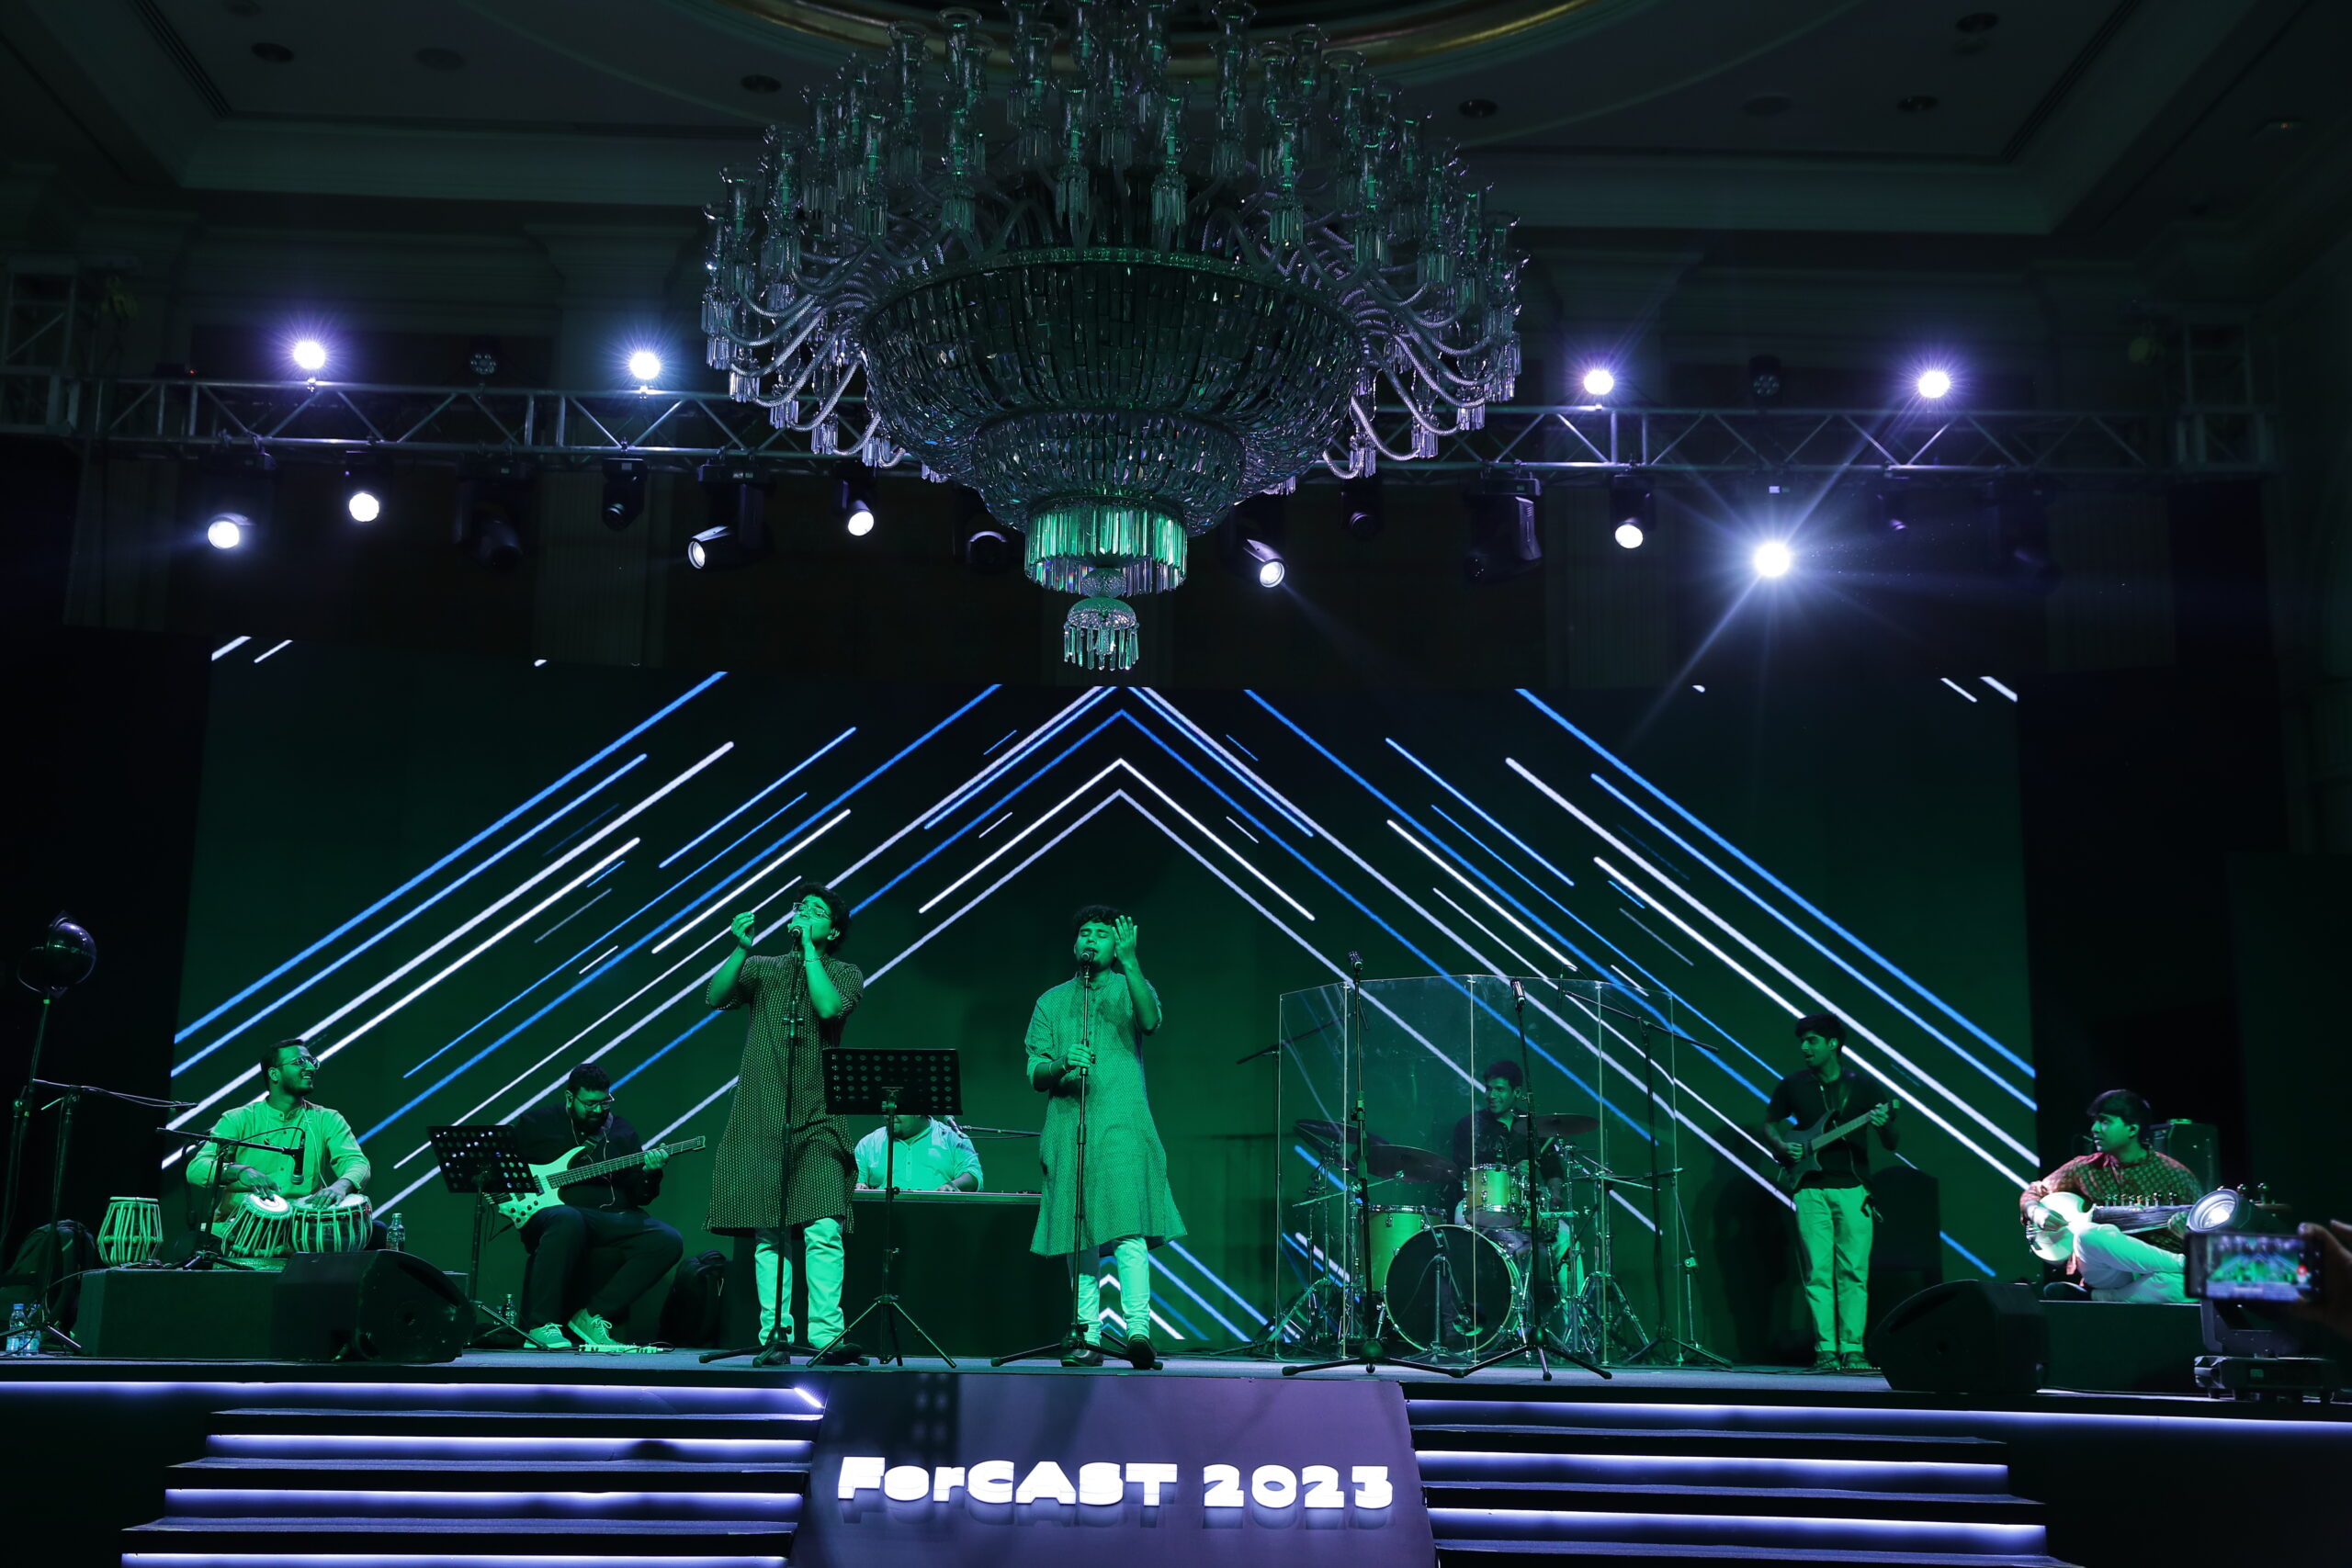 Anirudh Verma Collective performing at a corporate conference in Delhi